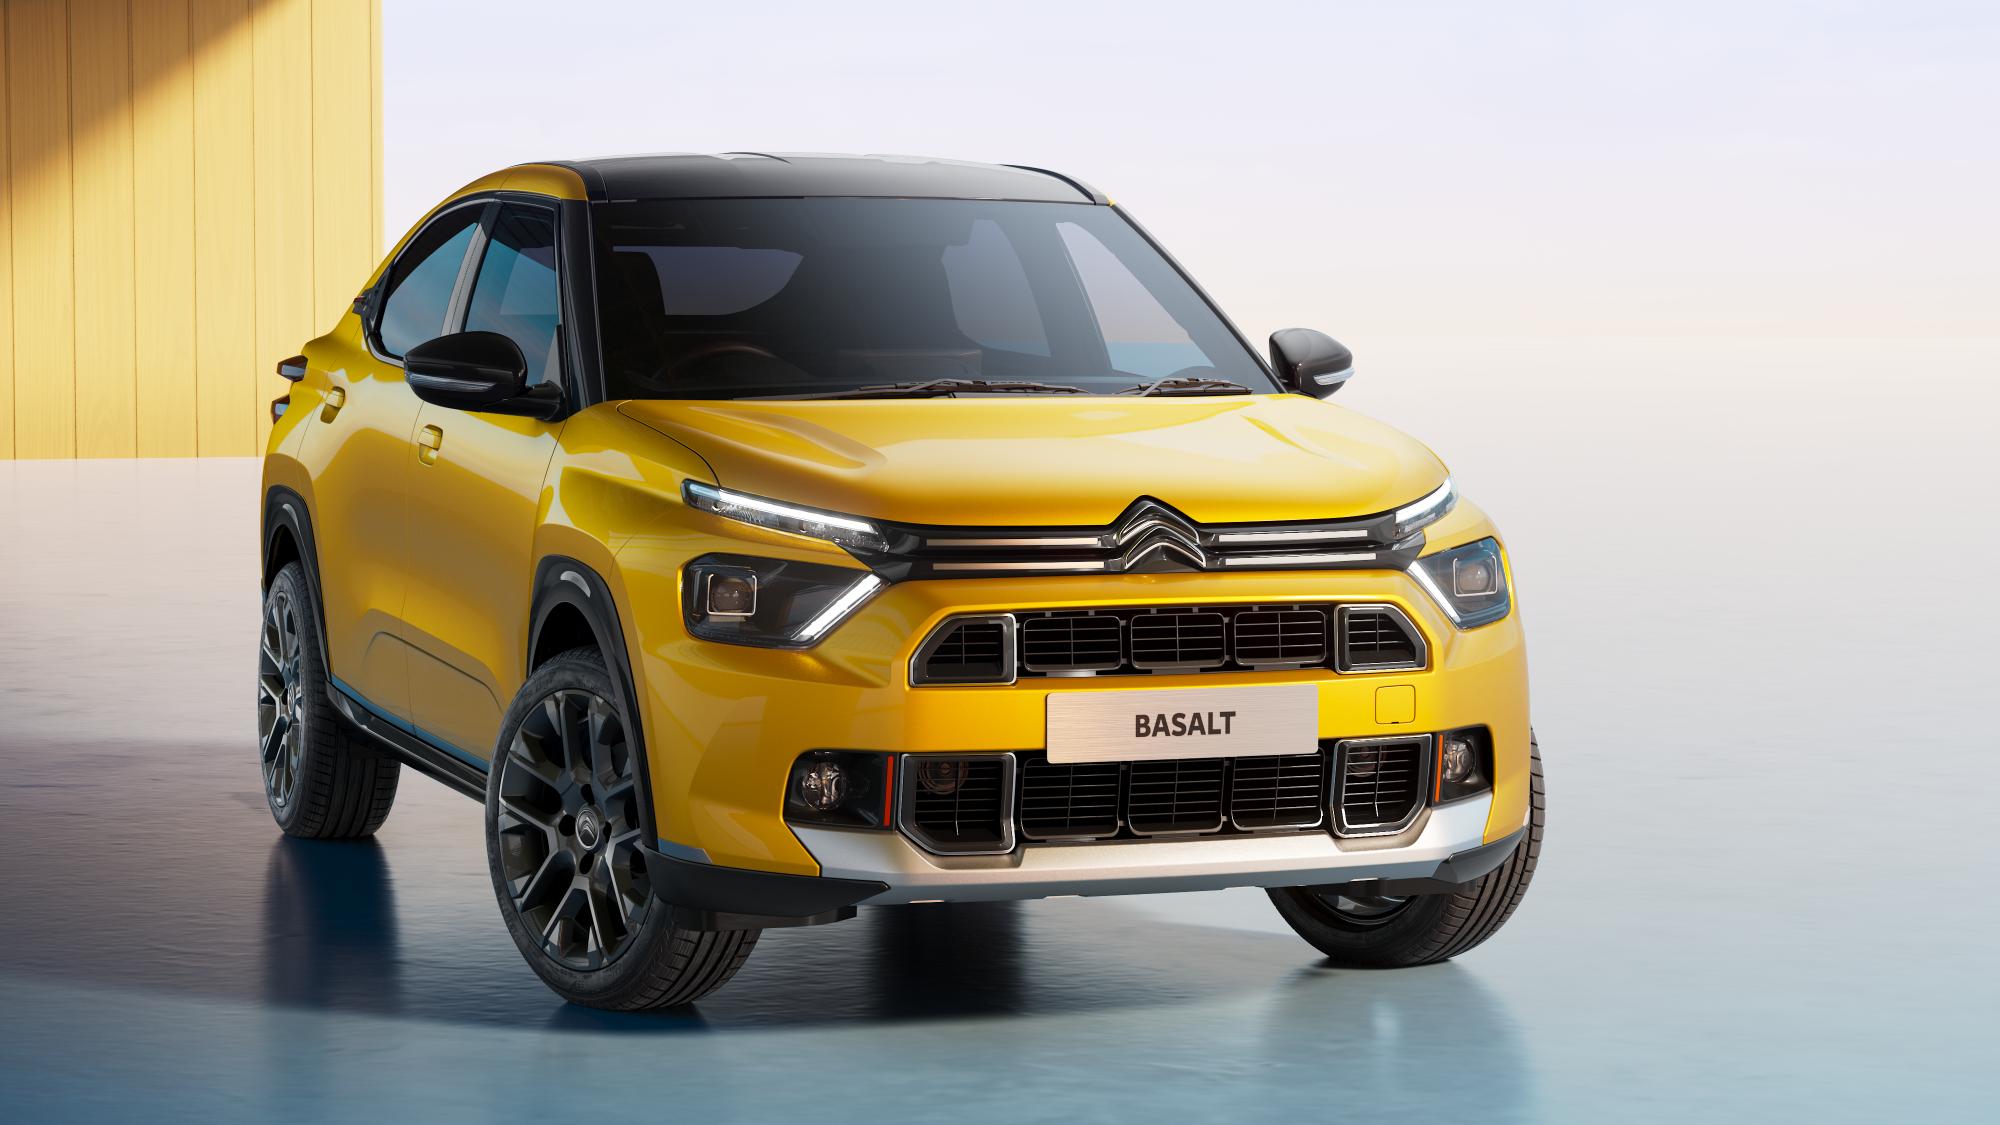 Citroen Basalt Coupe SUV Officially Revealed